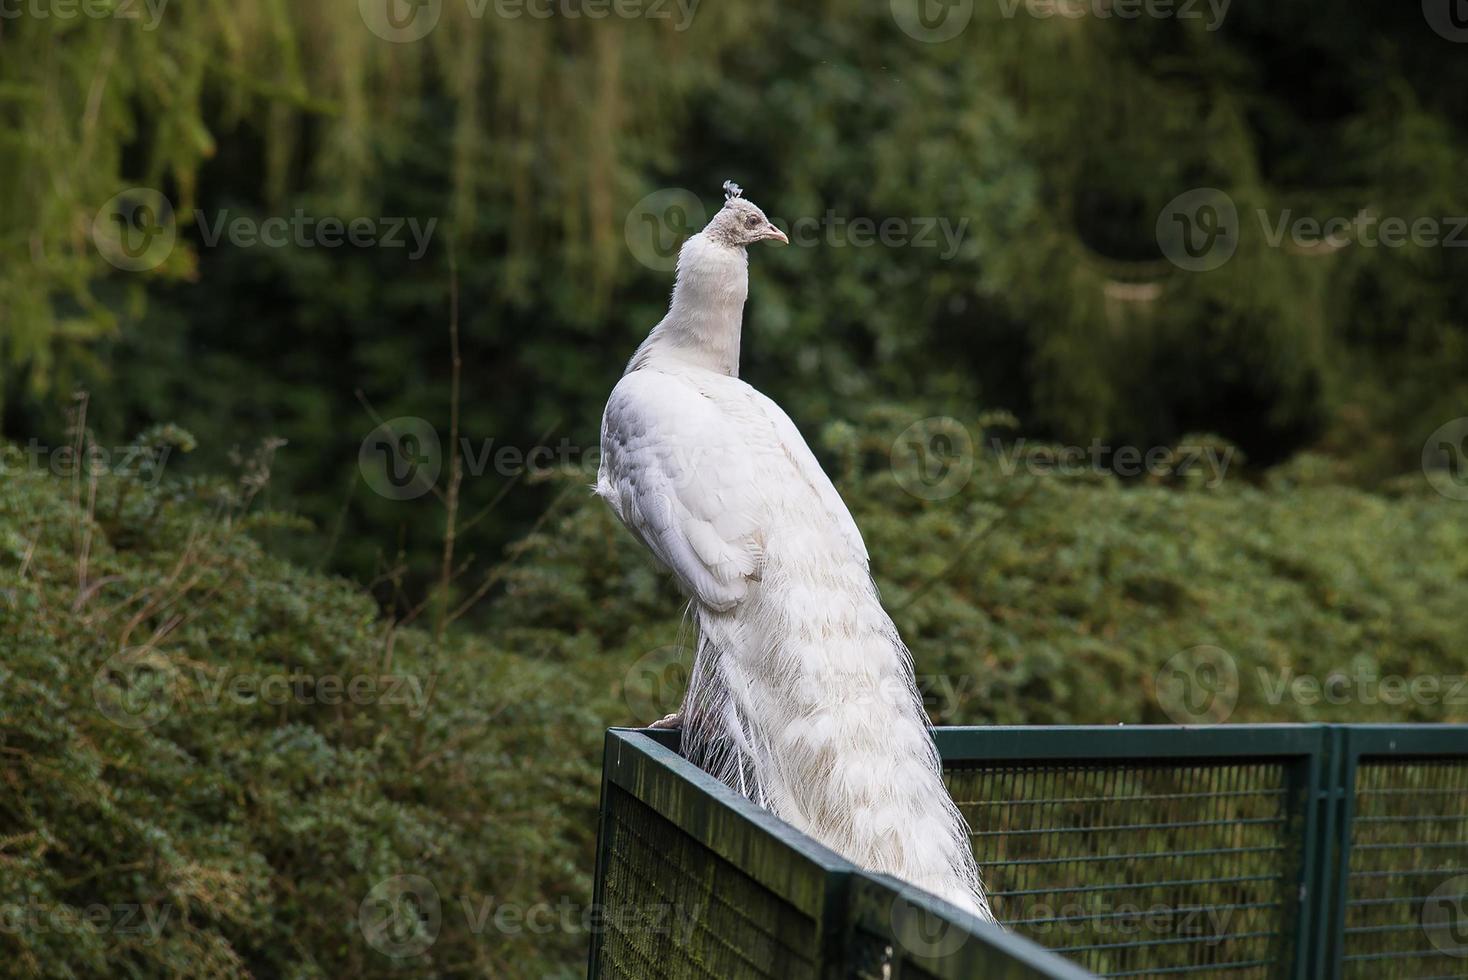 a peacock with white feathers perched on an iron fence photo